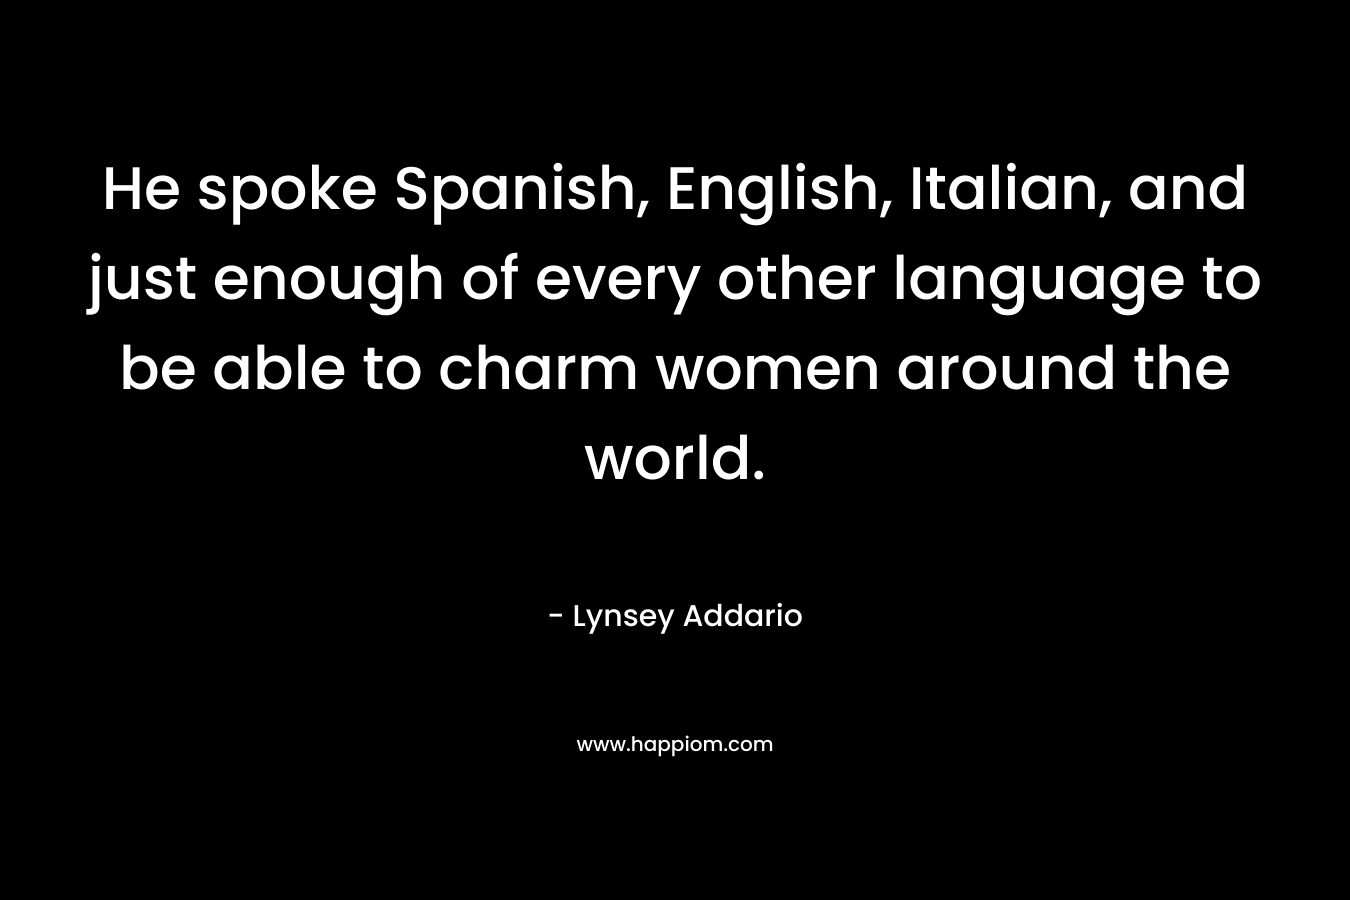 He spoke Spanish, English, Italian, and just enough of every other language to be able to charm women around the world.